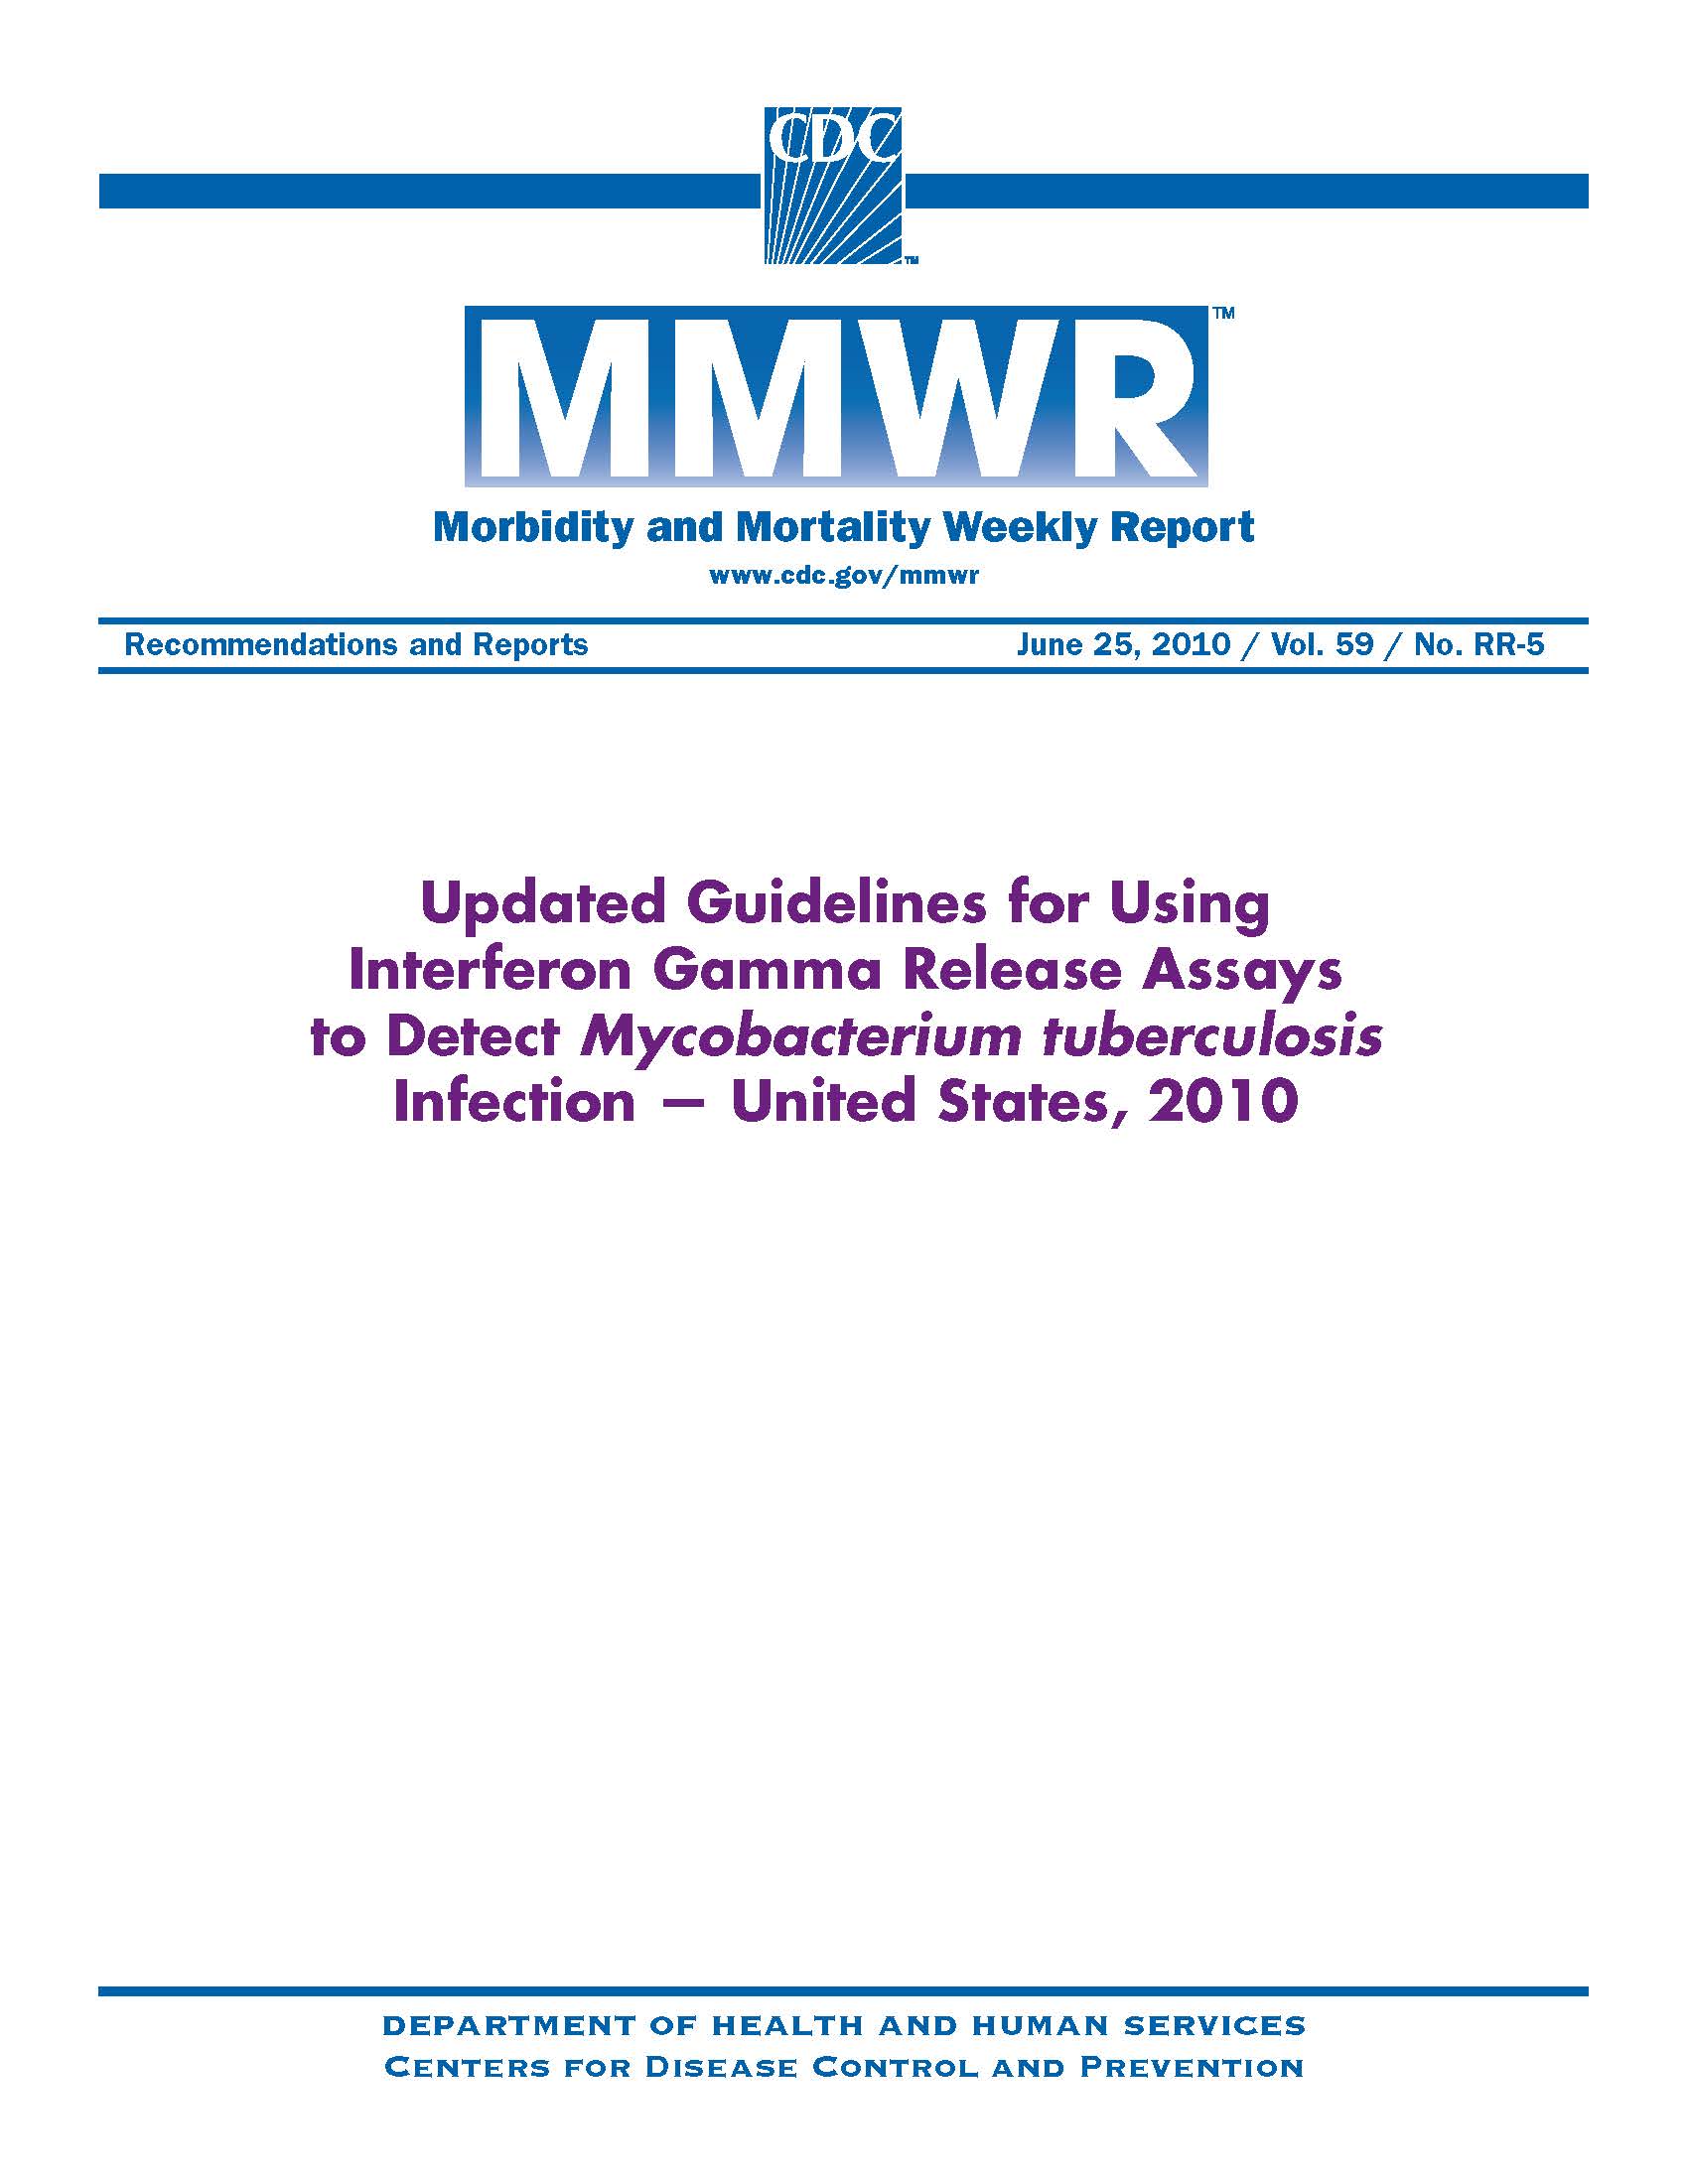 Updated Guidelines for Using Interferon Gamma Release Assays to Detect Mycobacterium tuberculosis Infection—United States, 2010 pdf image